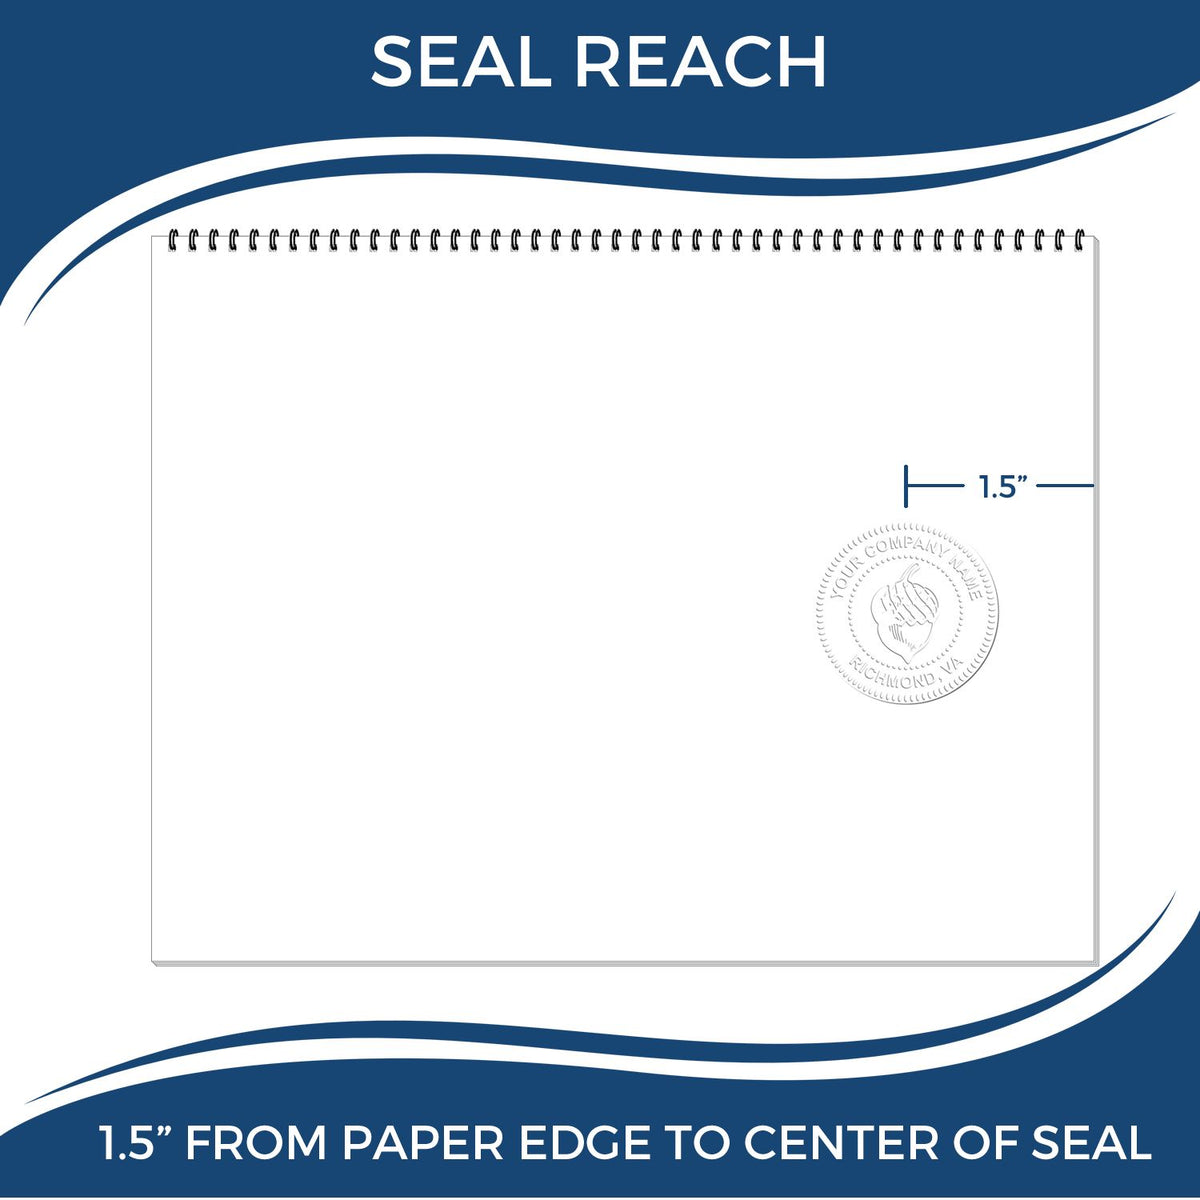 An infographic showing the seal reach which is represented by a ruler and a miniature seal image of the Hybrid Idaho Geologist Seal